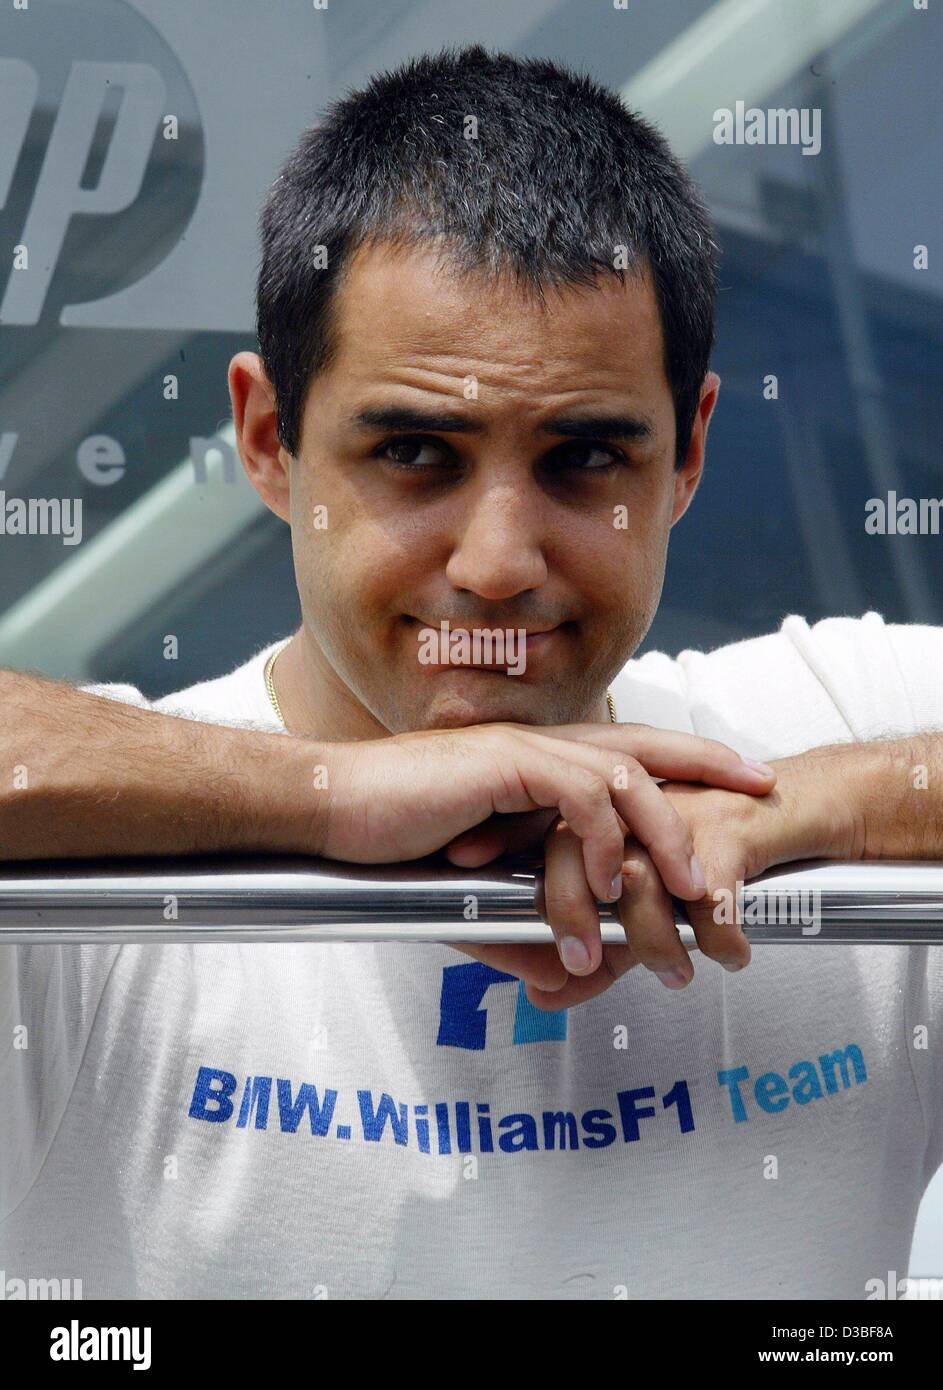 (dpa) - Colombian formula one pilot Juan Pablo Montoya (BMW-Williams) pictured at the Nuerburgring race track, Germany, 28 June 2003. The European Grand Prix took place at the Nuerburgring on 29 June 2003. Stock Photo